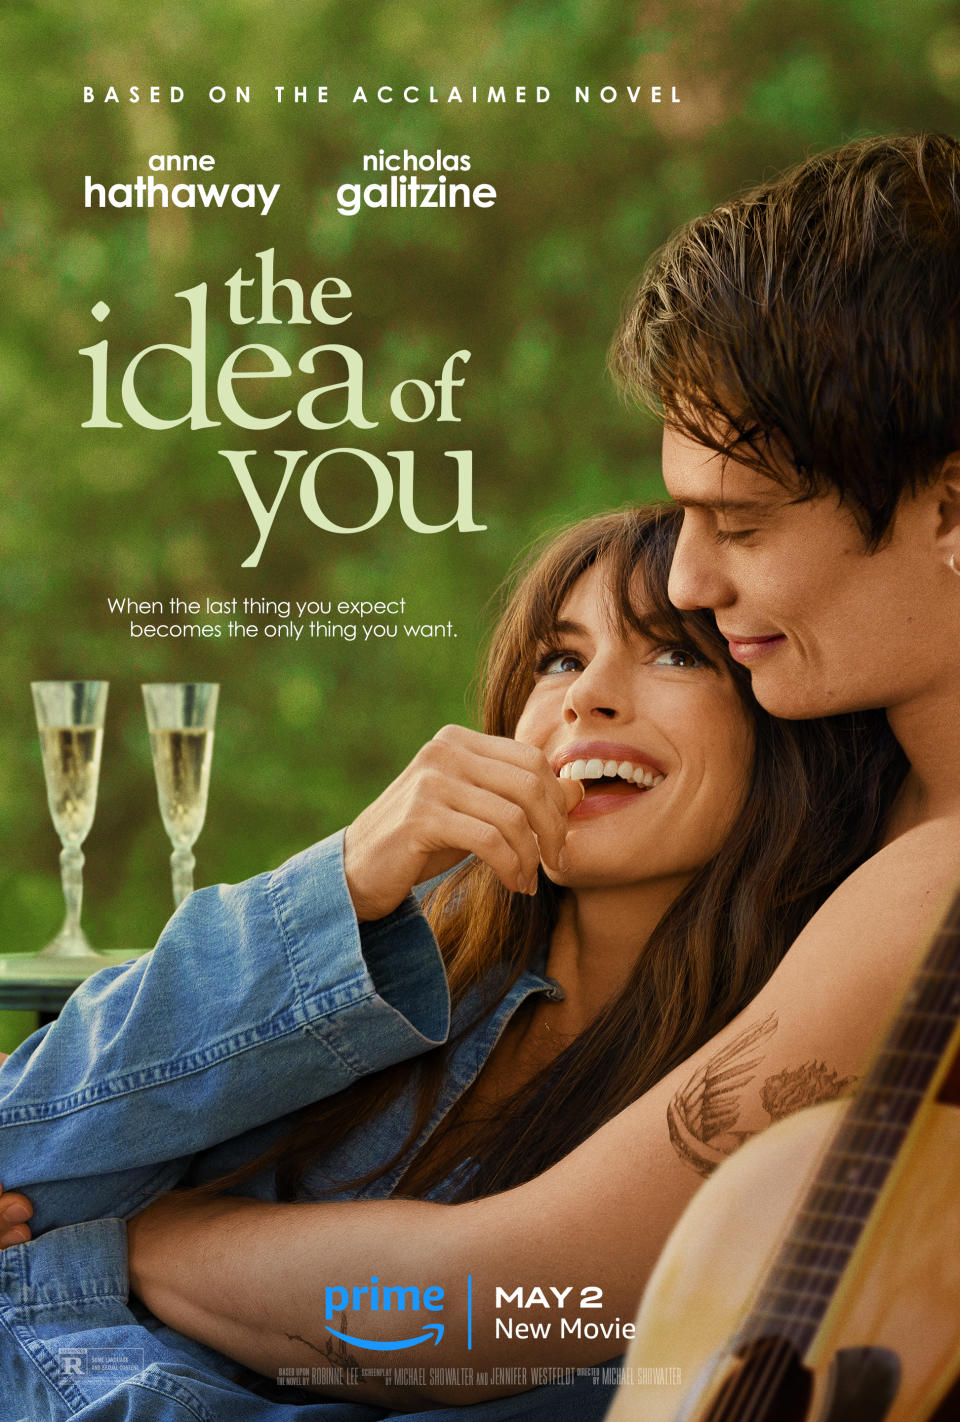 Movie poster for "The Idea of You" starring Anne Hathaway and Nicholas Galitzine, releasing May 2